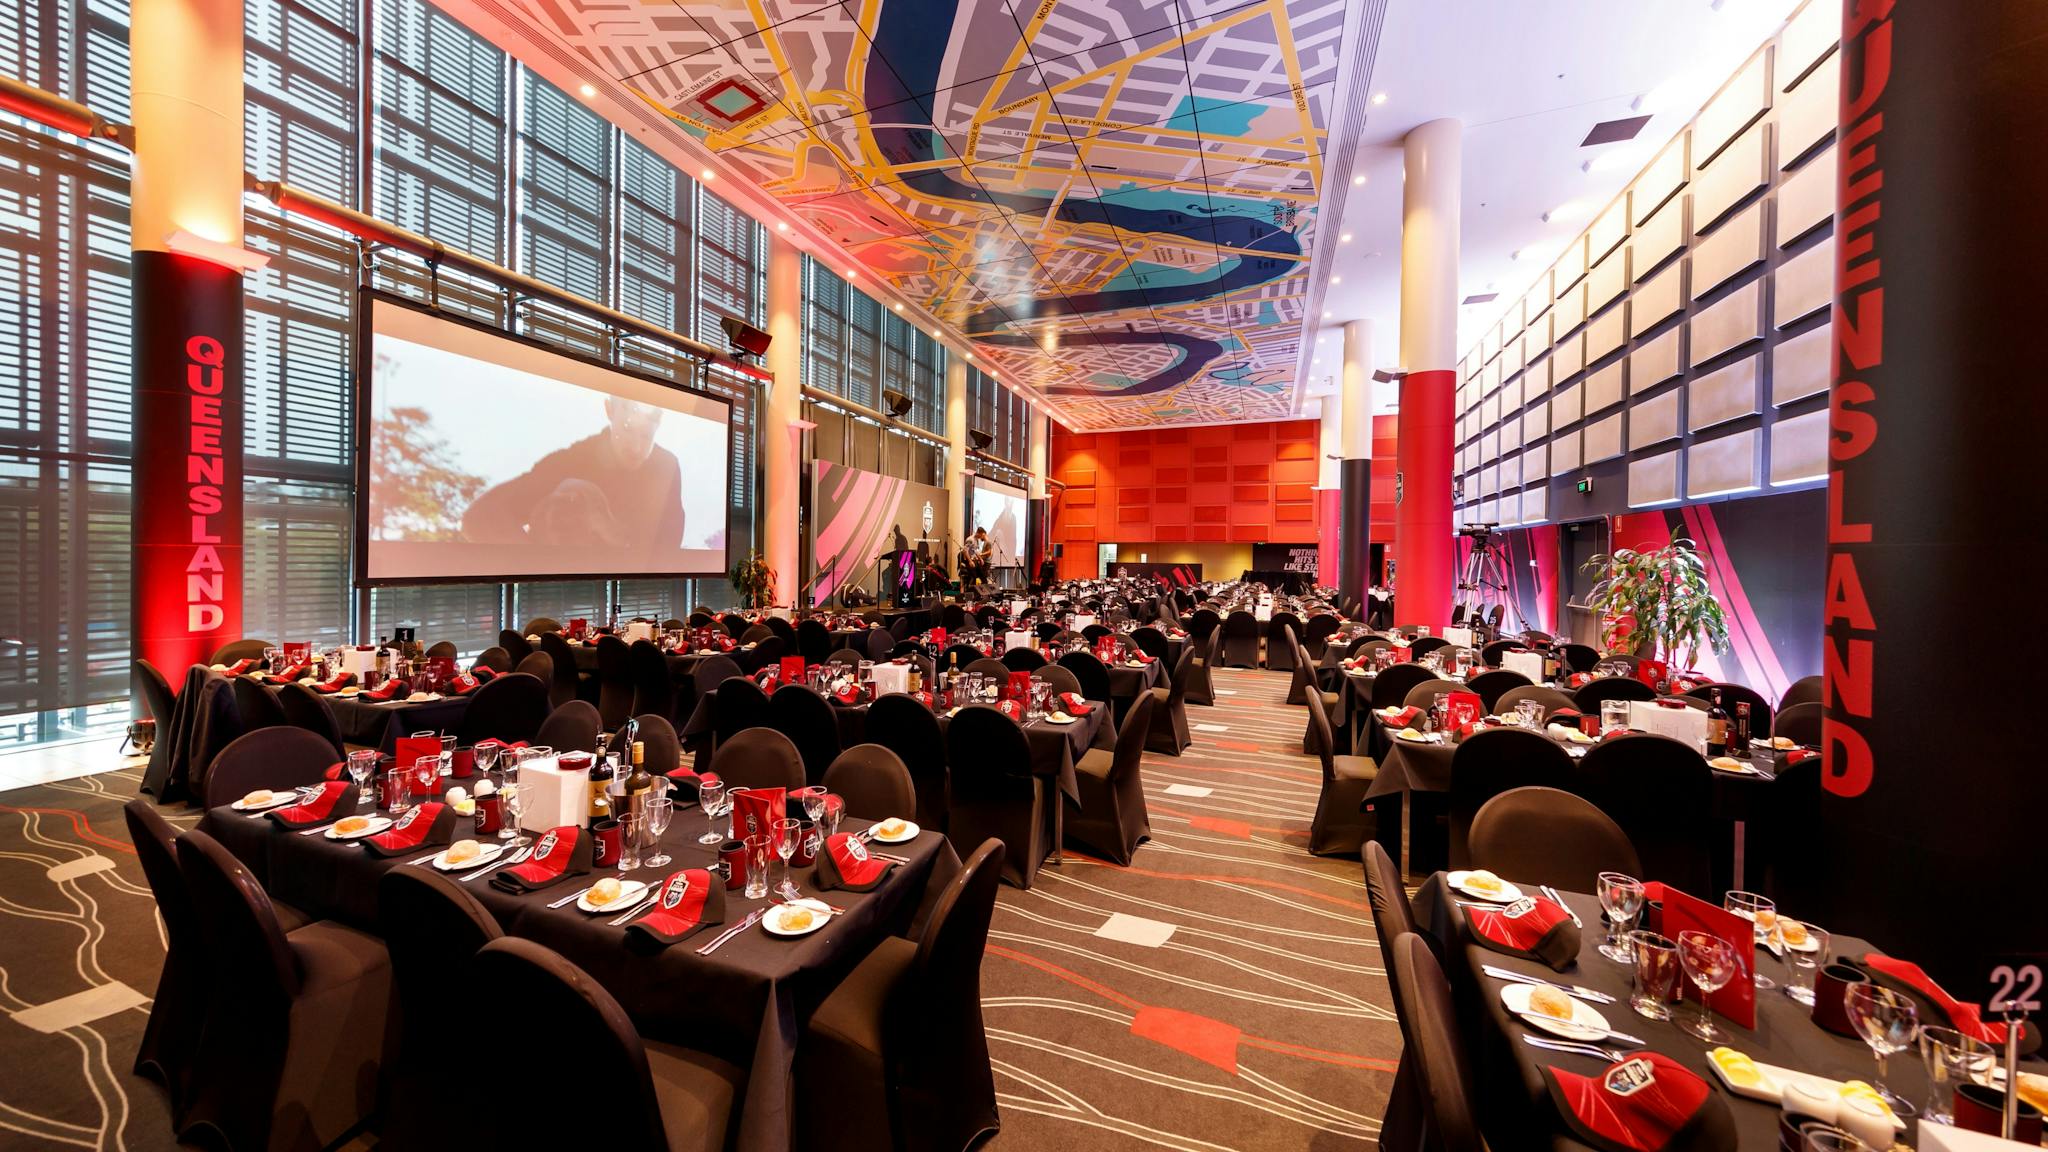 An image of the Paddington Room at Suncorp Stadium setup for a function